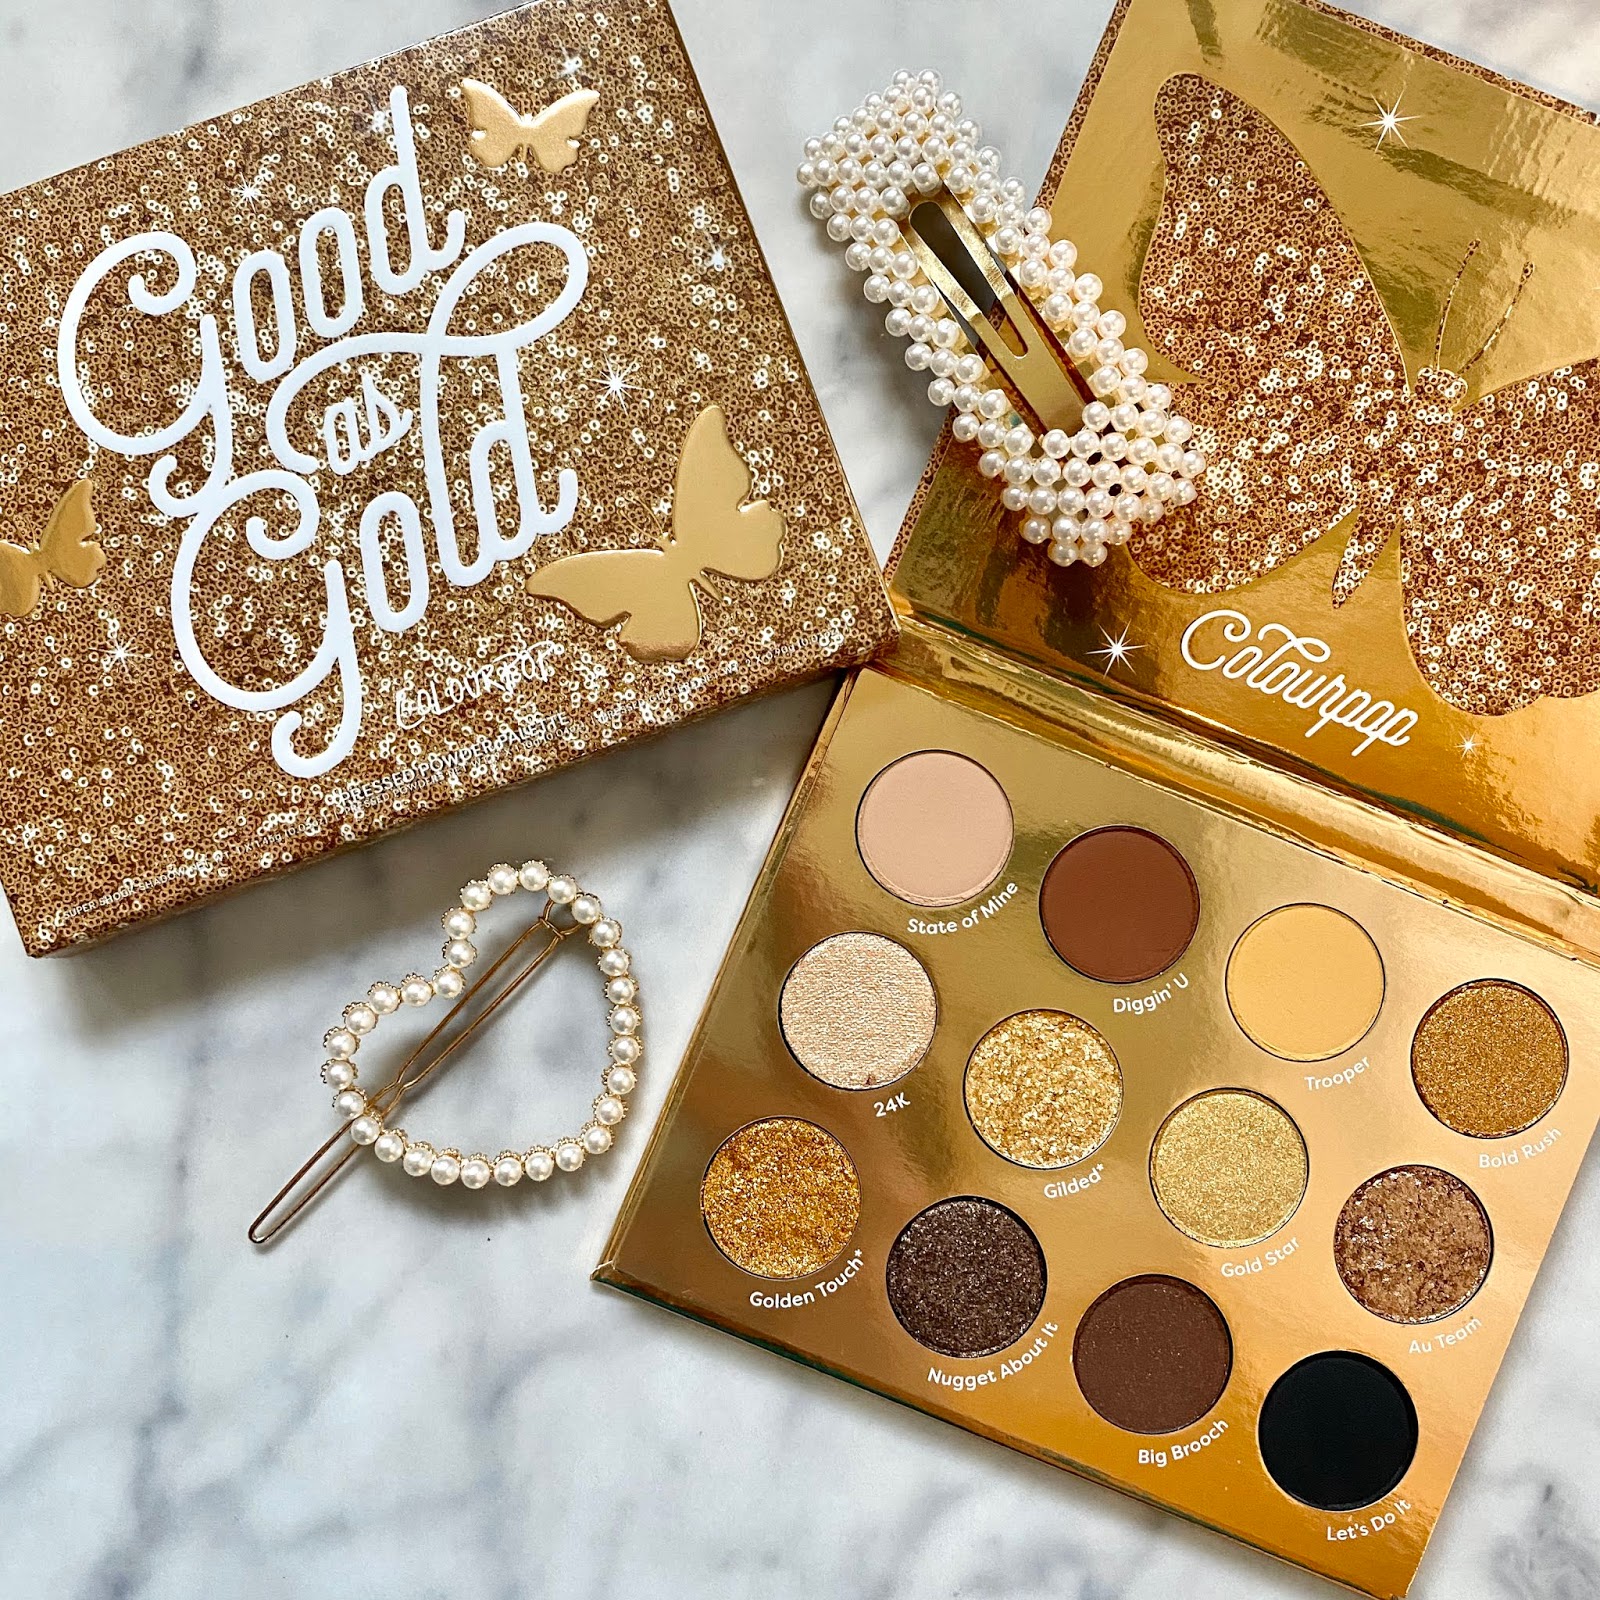 Review and " Good as Gold Eyeshadow Palette - Tigranouhi